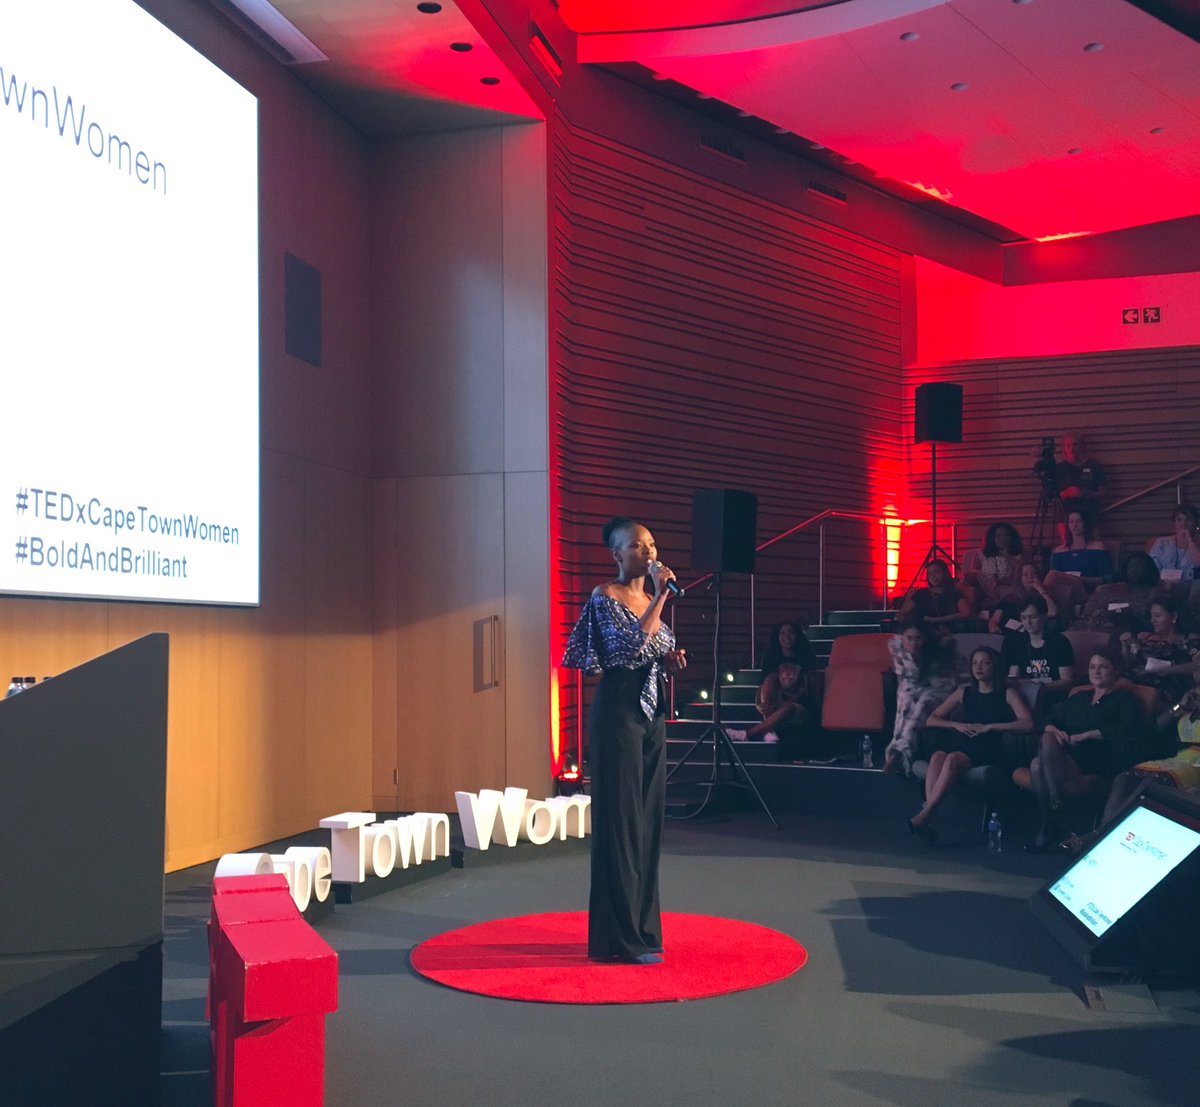 Vuyolwethu Dubese is the #BoldAndBrilliant @TEDxCTWomen event MC and hostess with the absolute mostest! @VDubese 

#TEDxCTWomen 
#TEDxCapeTownWomen 
#TEDxWomen
#TEDx